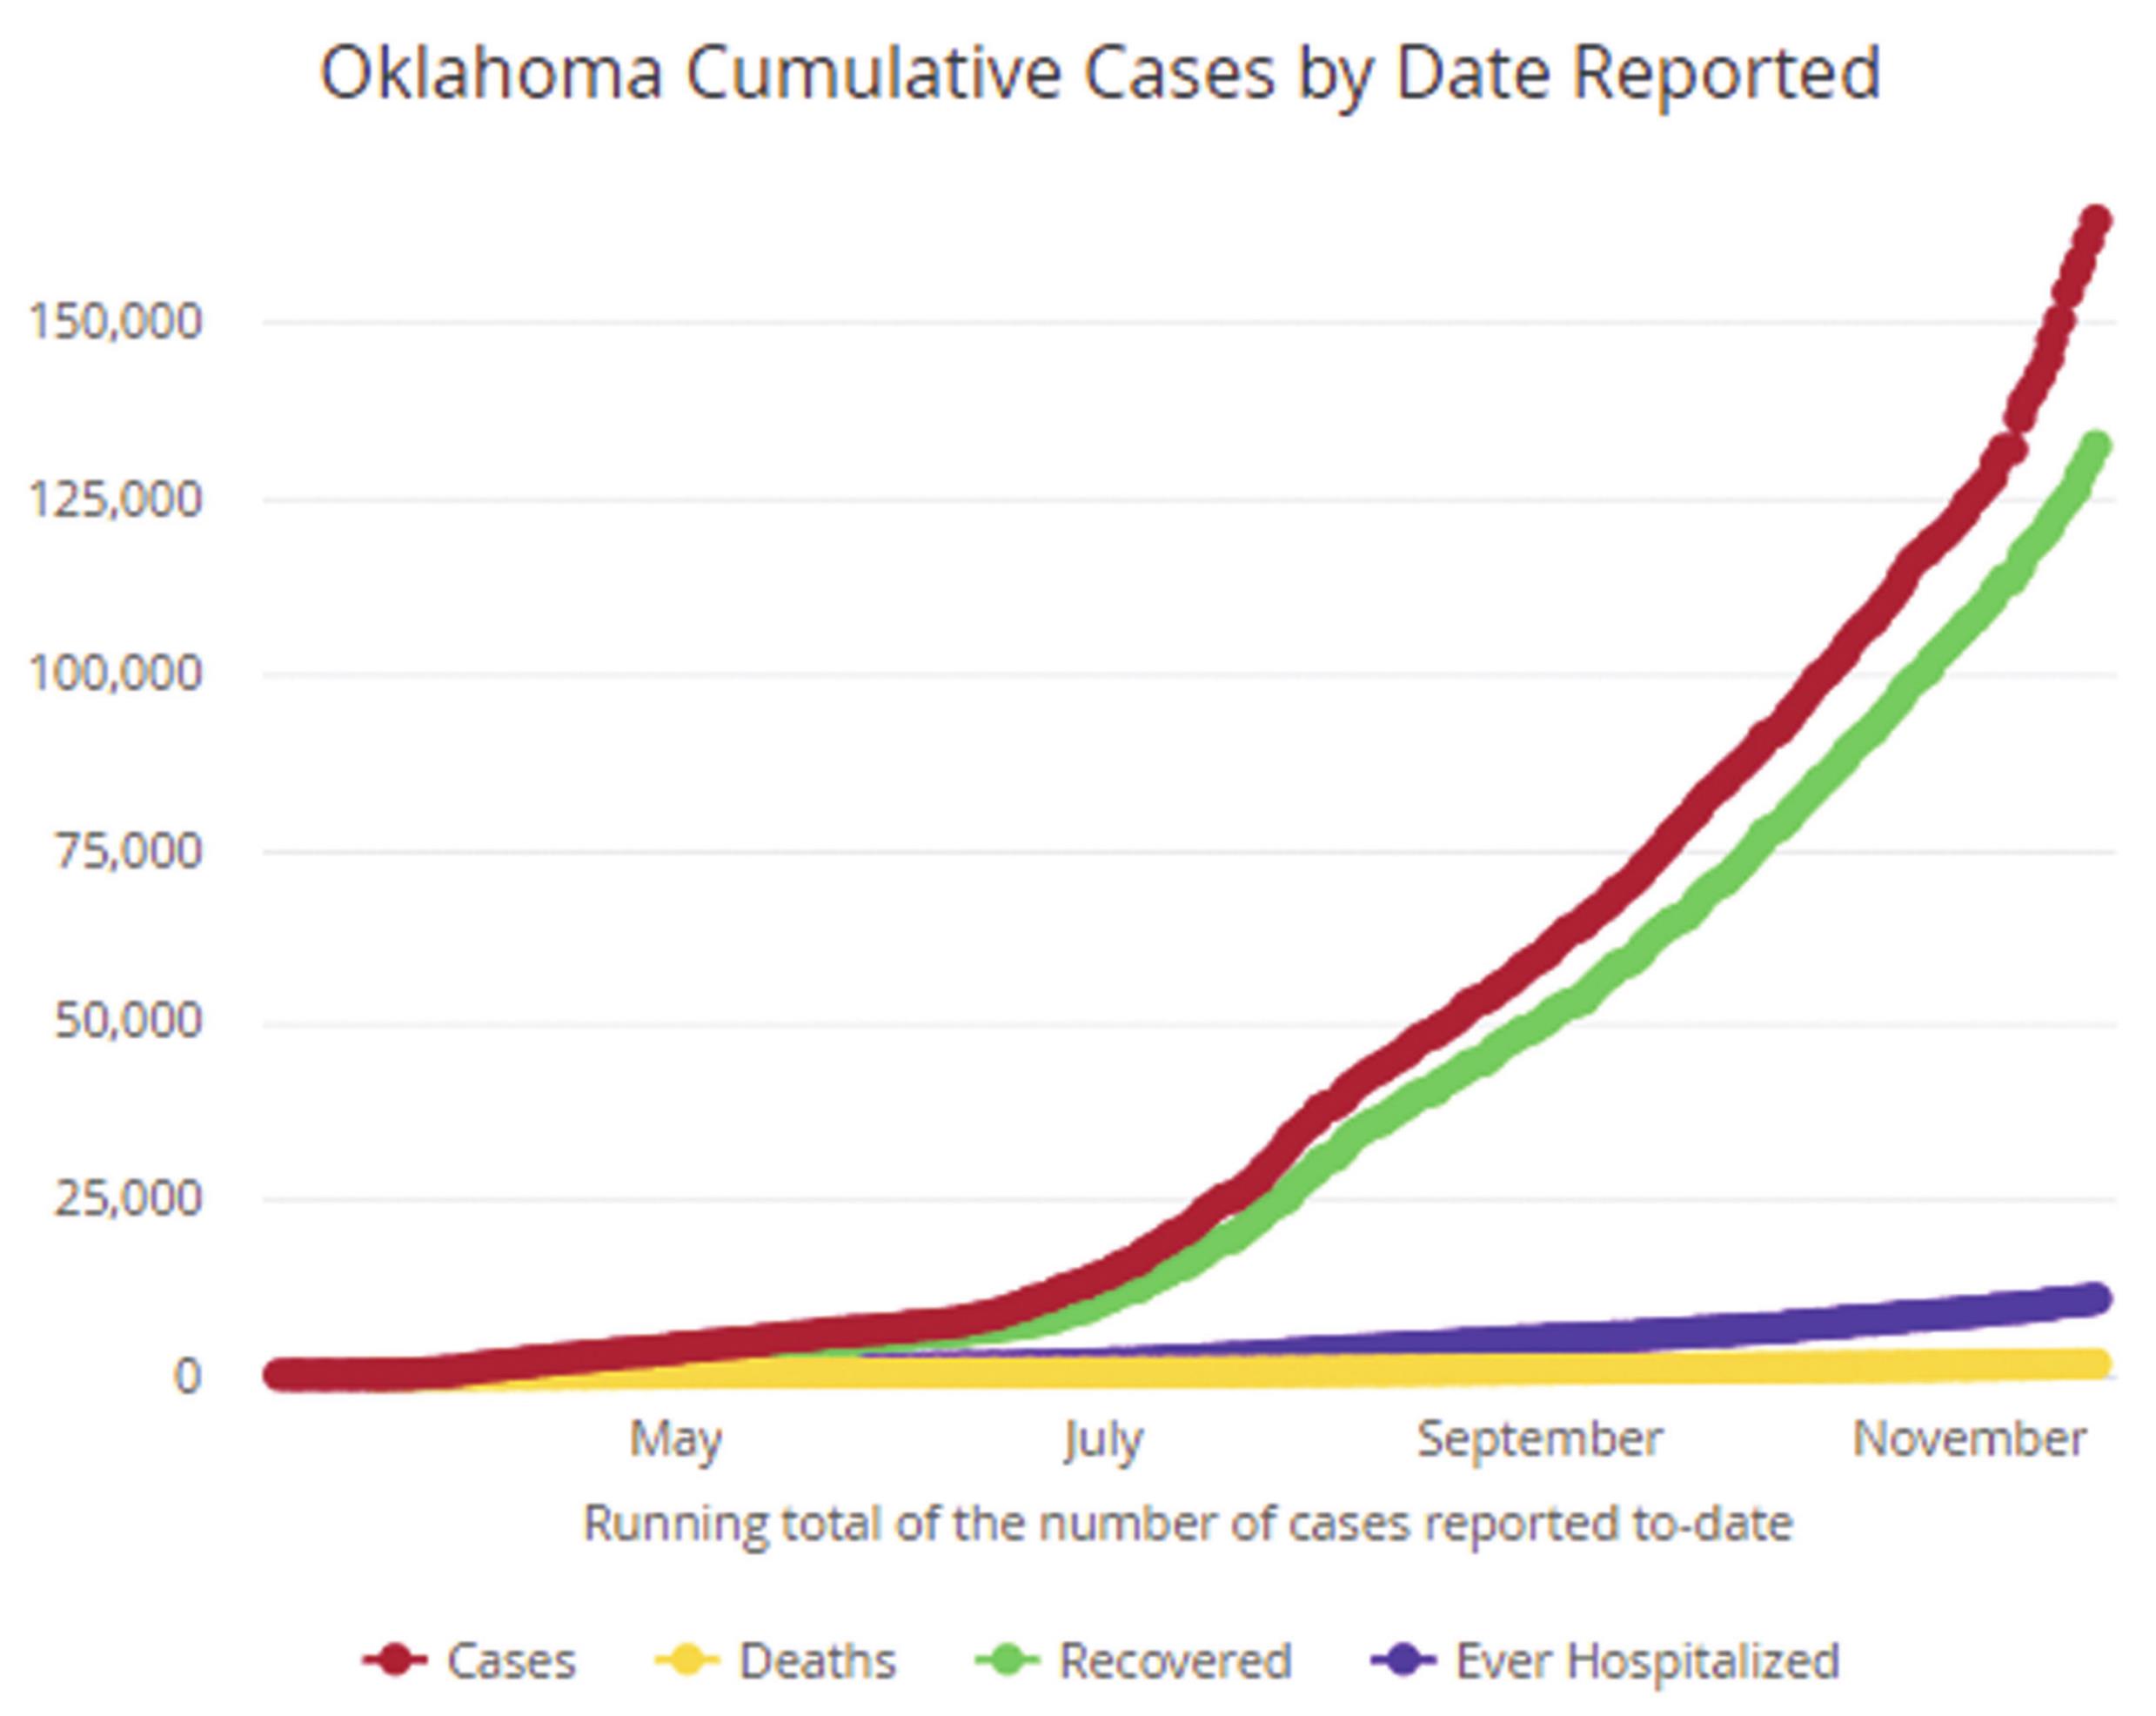 This chart shows the number of total COVID-19 cases, grouped with deaths, recoveries and hospitalizations since the pandemic began earlier this year. Provided